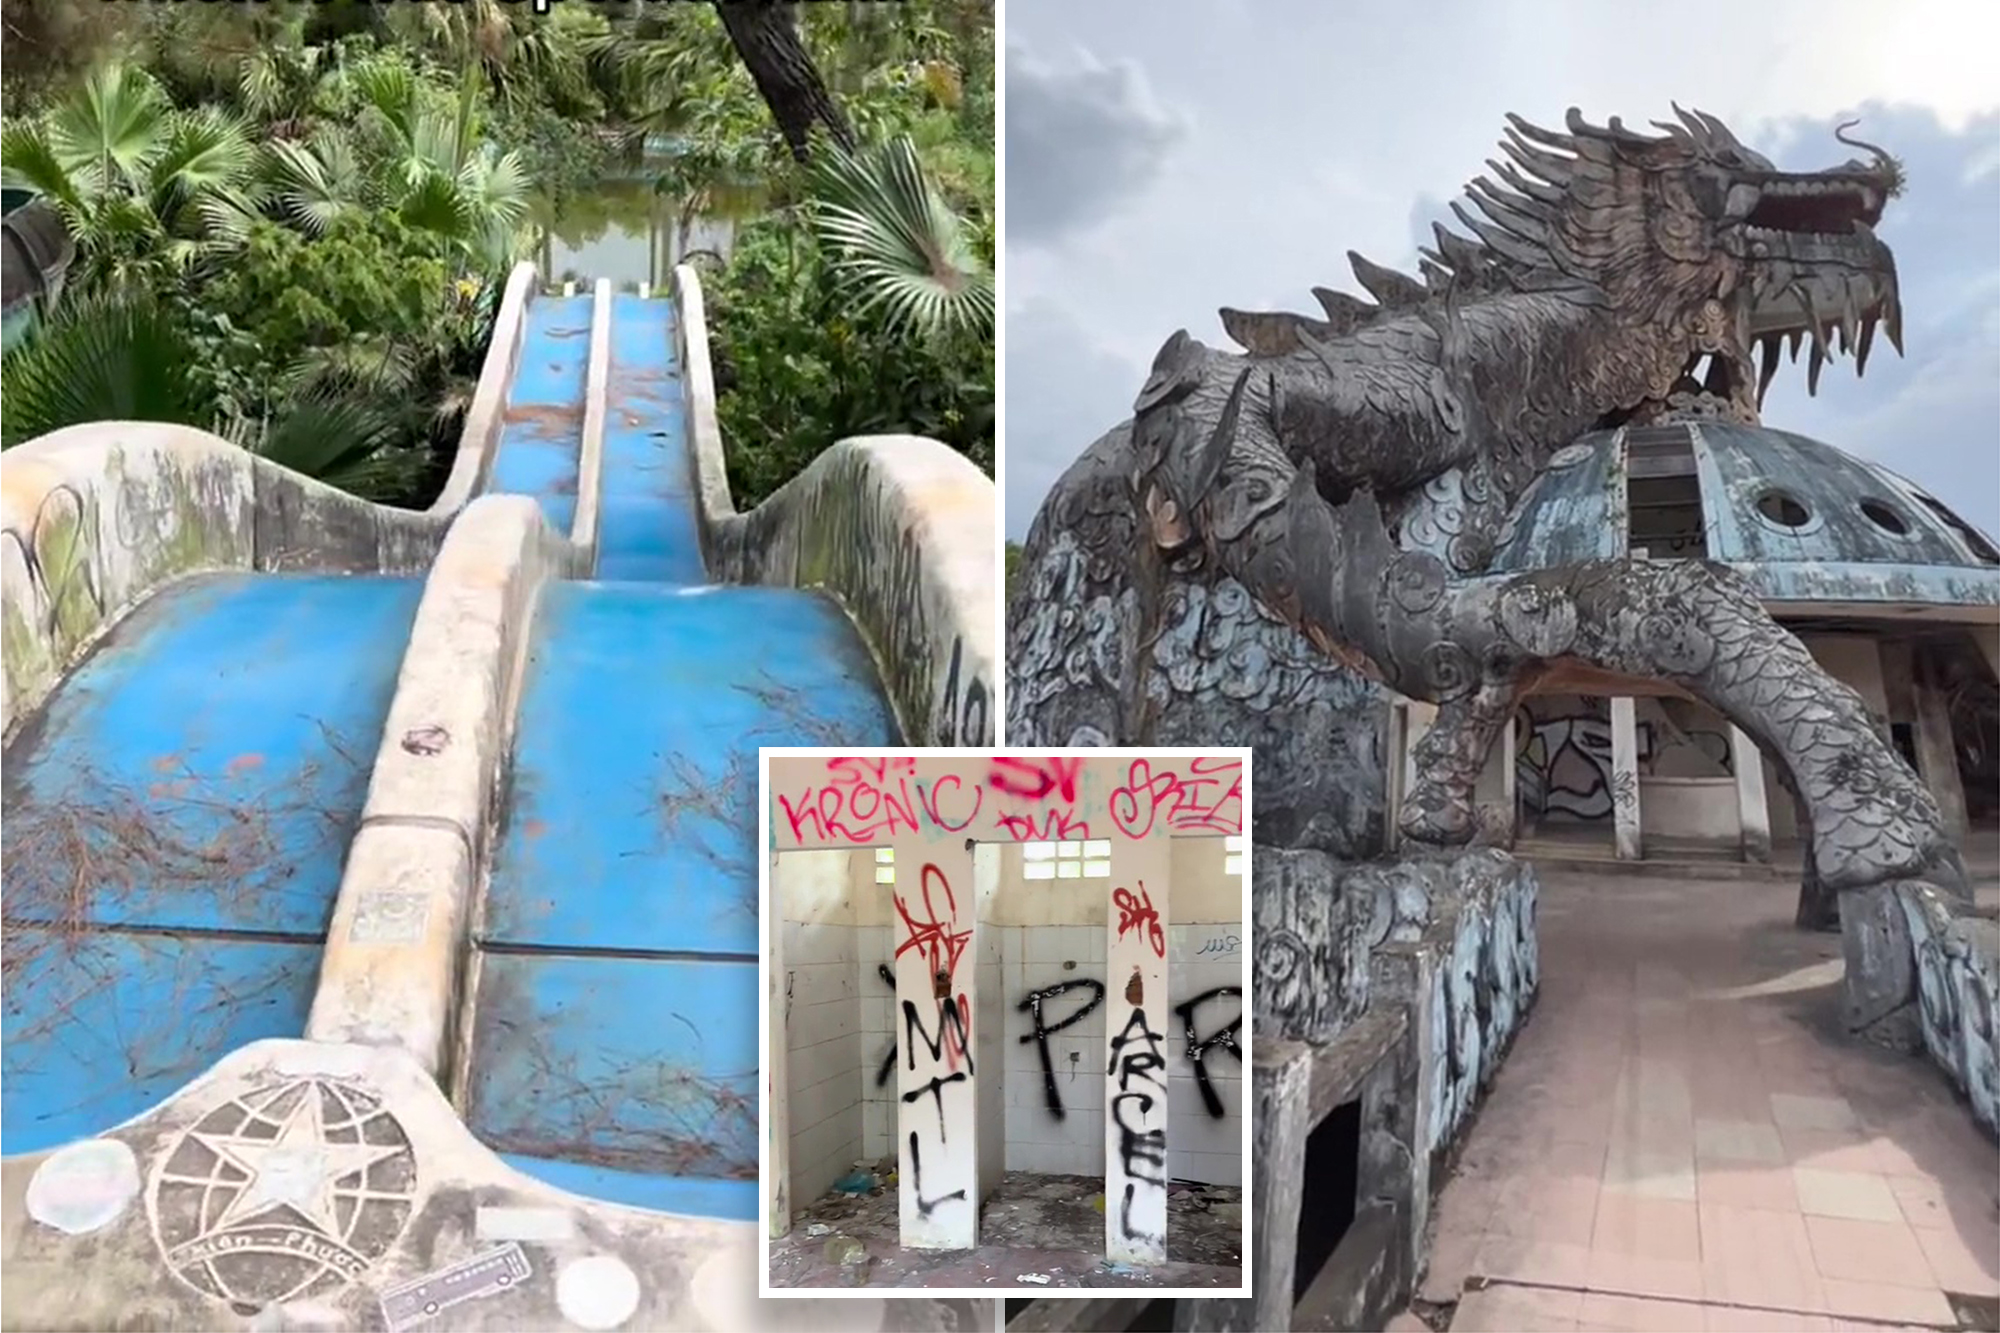 Eerie photos capture a deteriorated and abandoned Vietnamese water park believed by locals to be haunted.